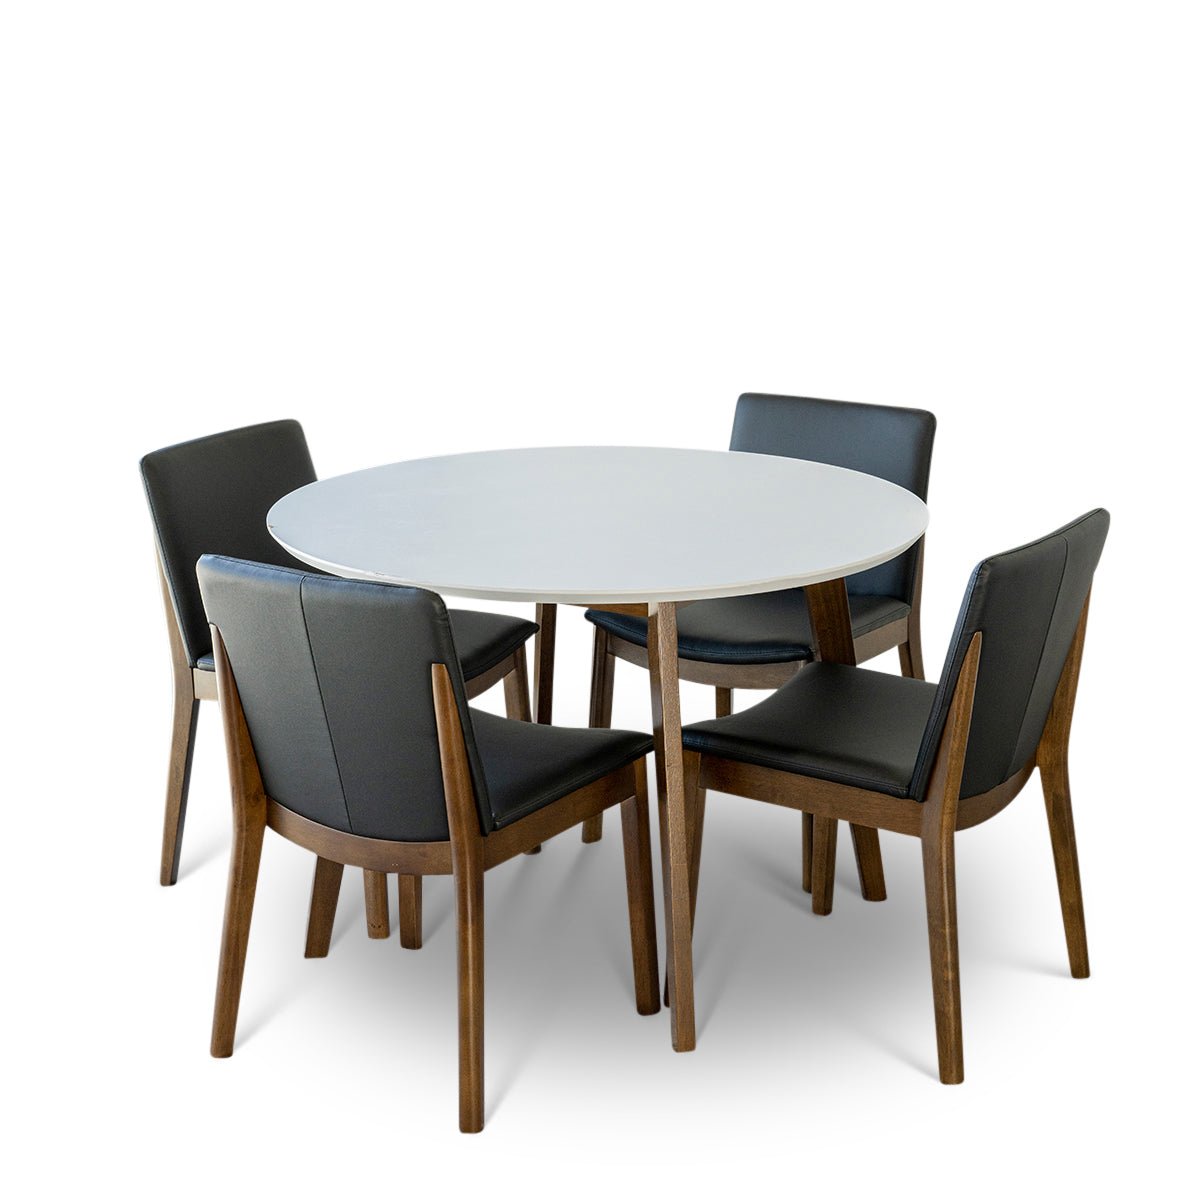 Aliana (White) Dining Set with 4 Virginia (Black Leather) Chairs